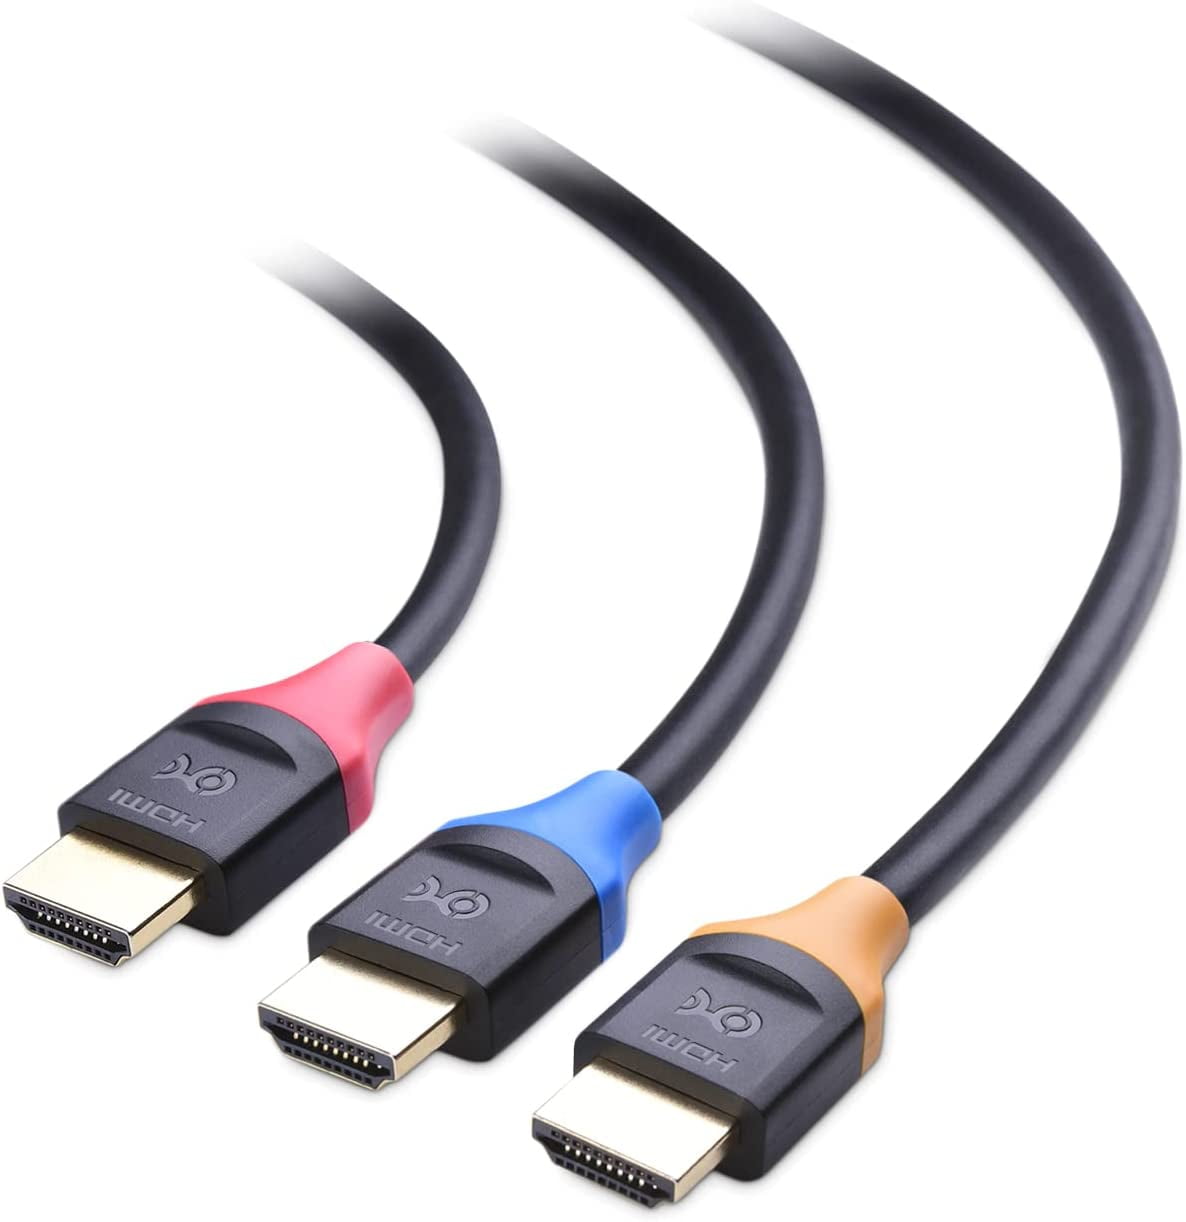 Cable Matters 3-Pack High Speed HDMI Cable 6 ft with 4K @60Hz, @144Hz, FreeSync, G-SYNC and HDR Support for Gaming Monitor, PC, Apple TV, and More - Walmart.com